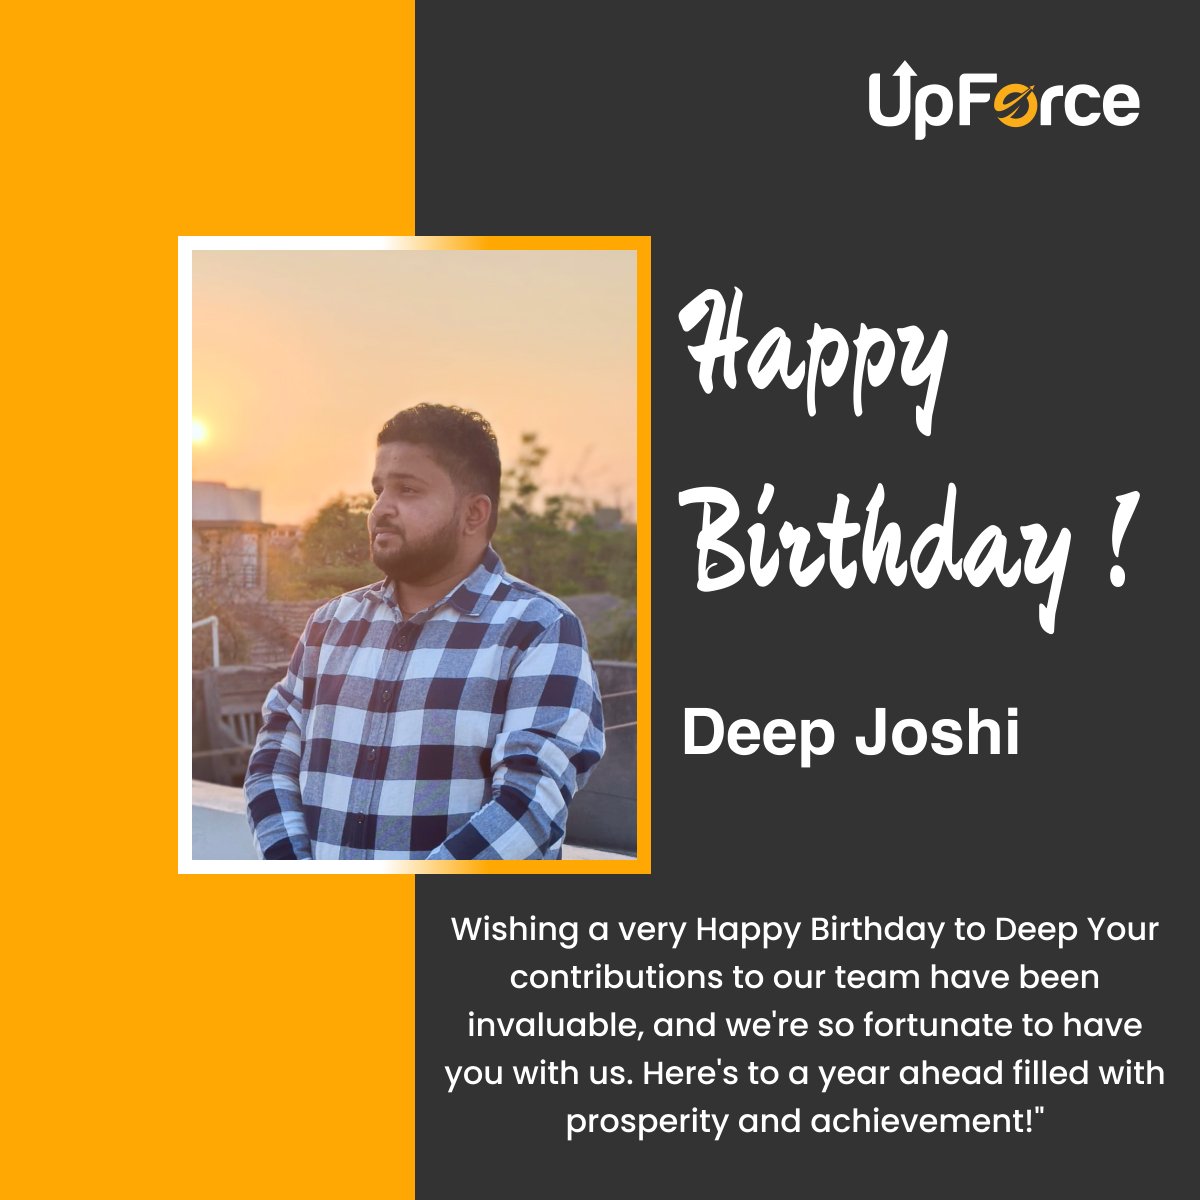 Double the celebrations, double the joy! 🎉 Wishing a very happy birthday to two incredible members of the UpforceTech family! 🎂🎈 Your hard work and dedication inspire us every day. Here's to another year of success and happiness! 🥳 #UpforceTech #BirthdayWishes #TeamLove